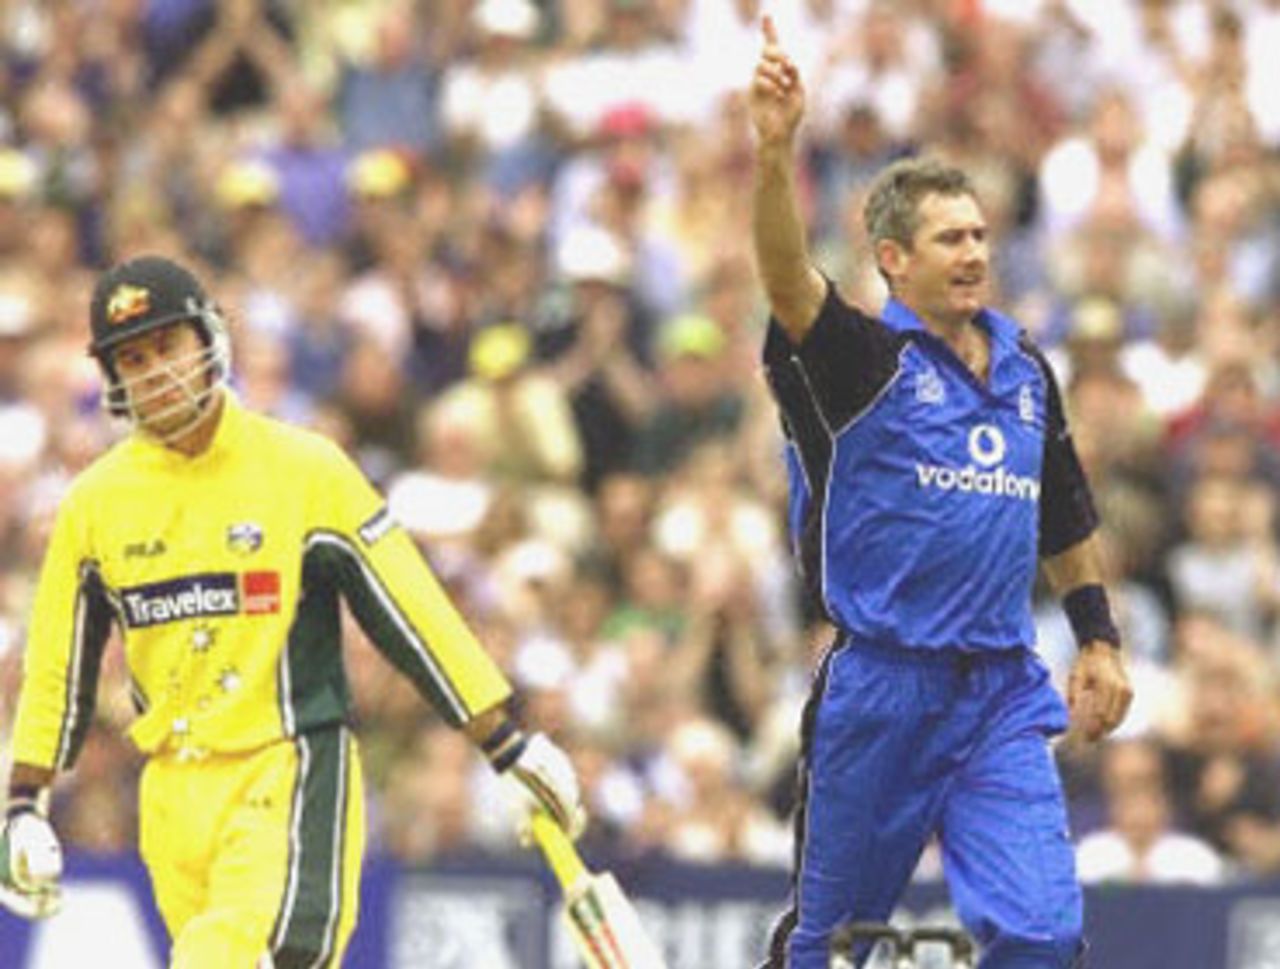 Andrew Caddick celebrates capturing the wicket of Ponting, 5th ODI at Old Trafford,14 June 2001.